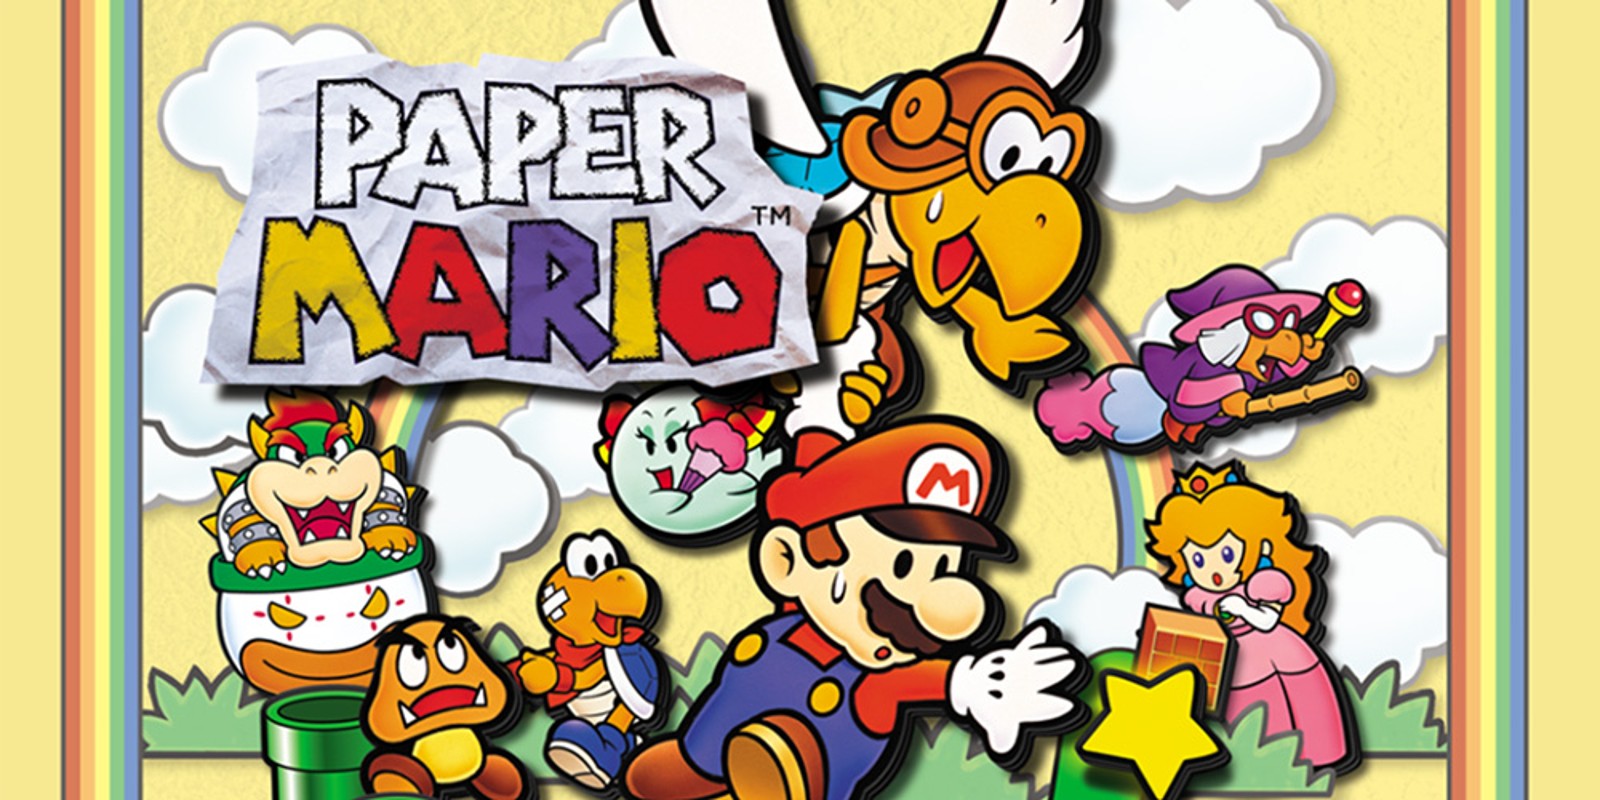 Rumor: More talk about Mario re-releases on Switch, Paper Mario